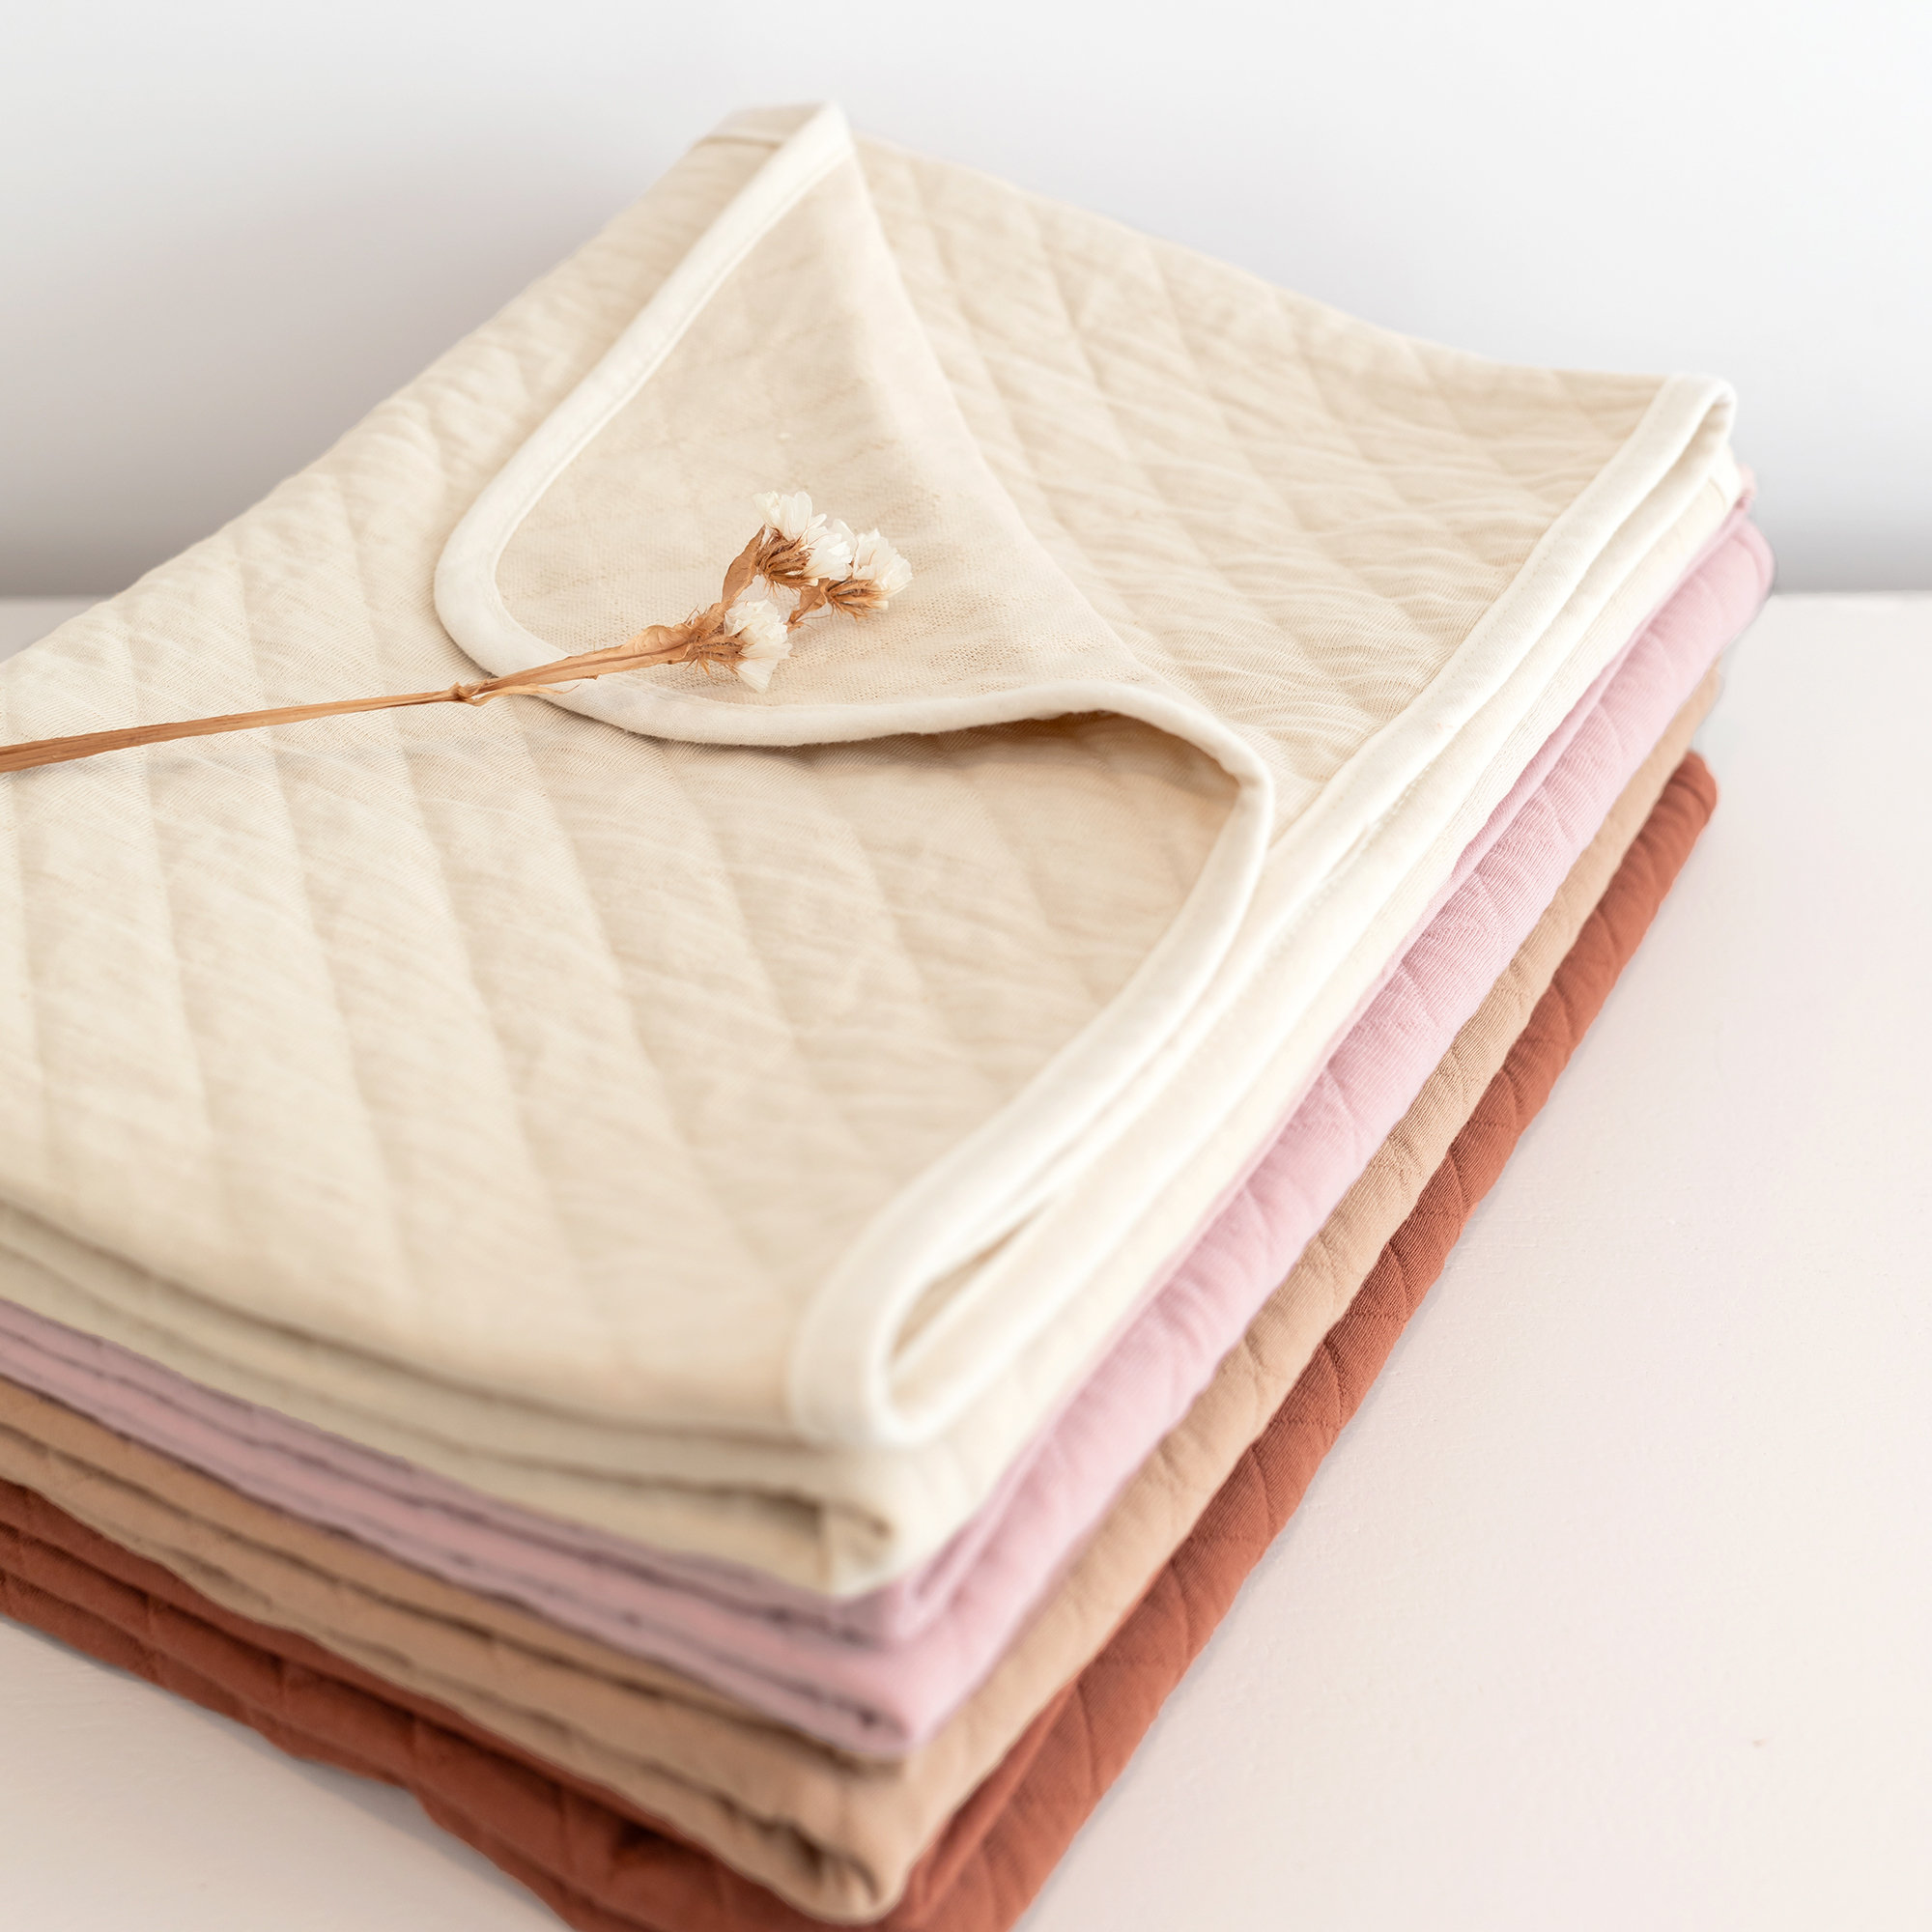 Blanket Pady quilted jersey 75x100cm QUILT Cream tog 1.5[BEDDING]